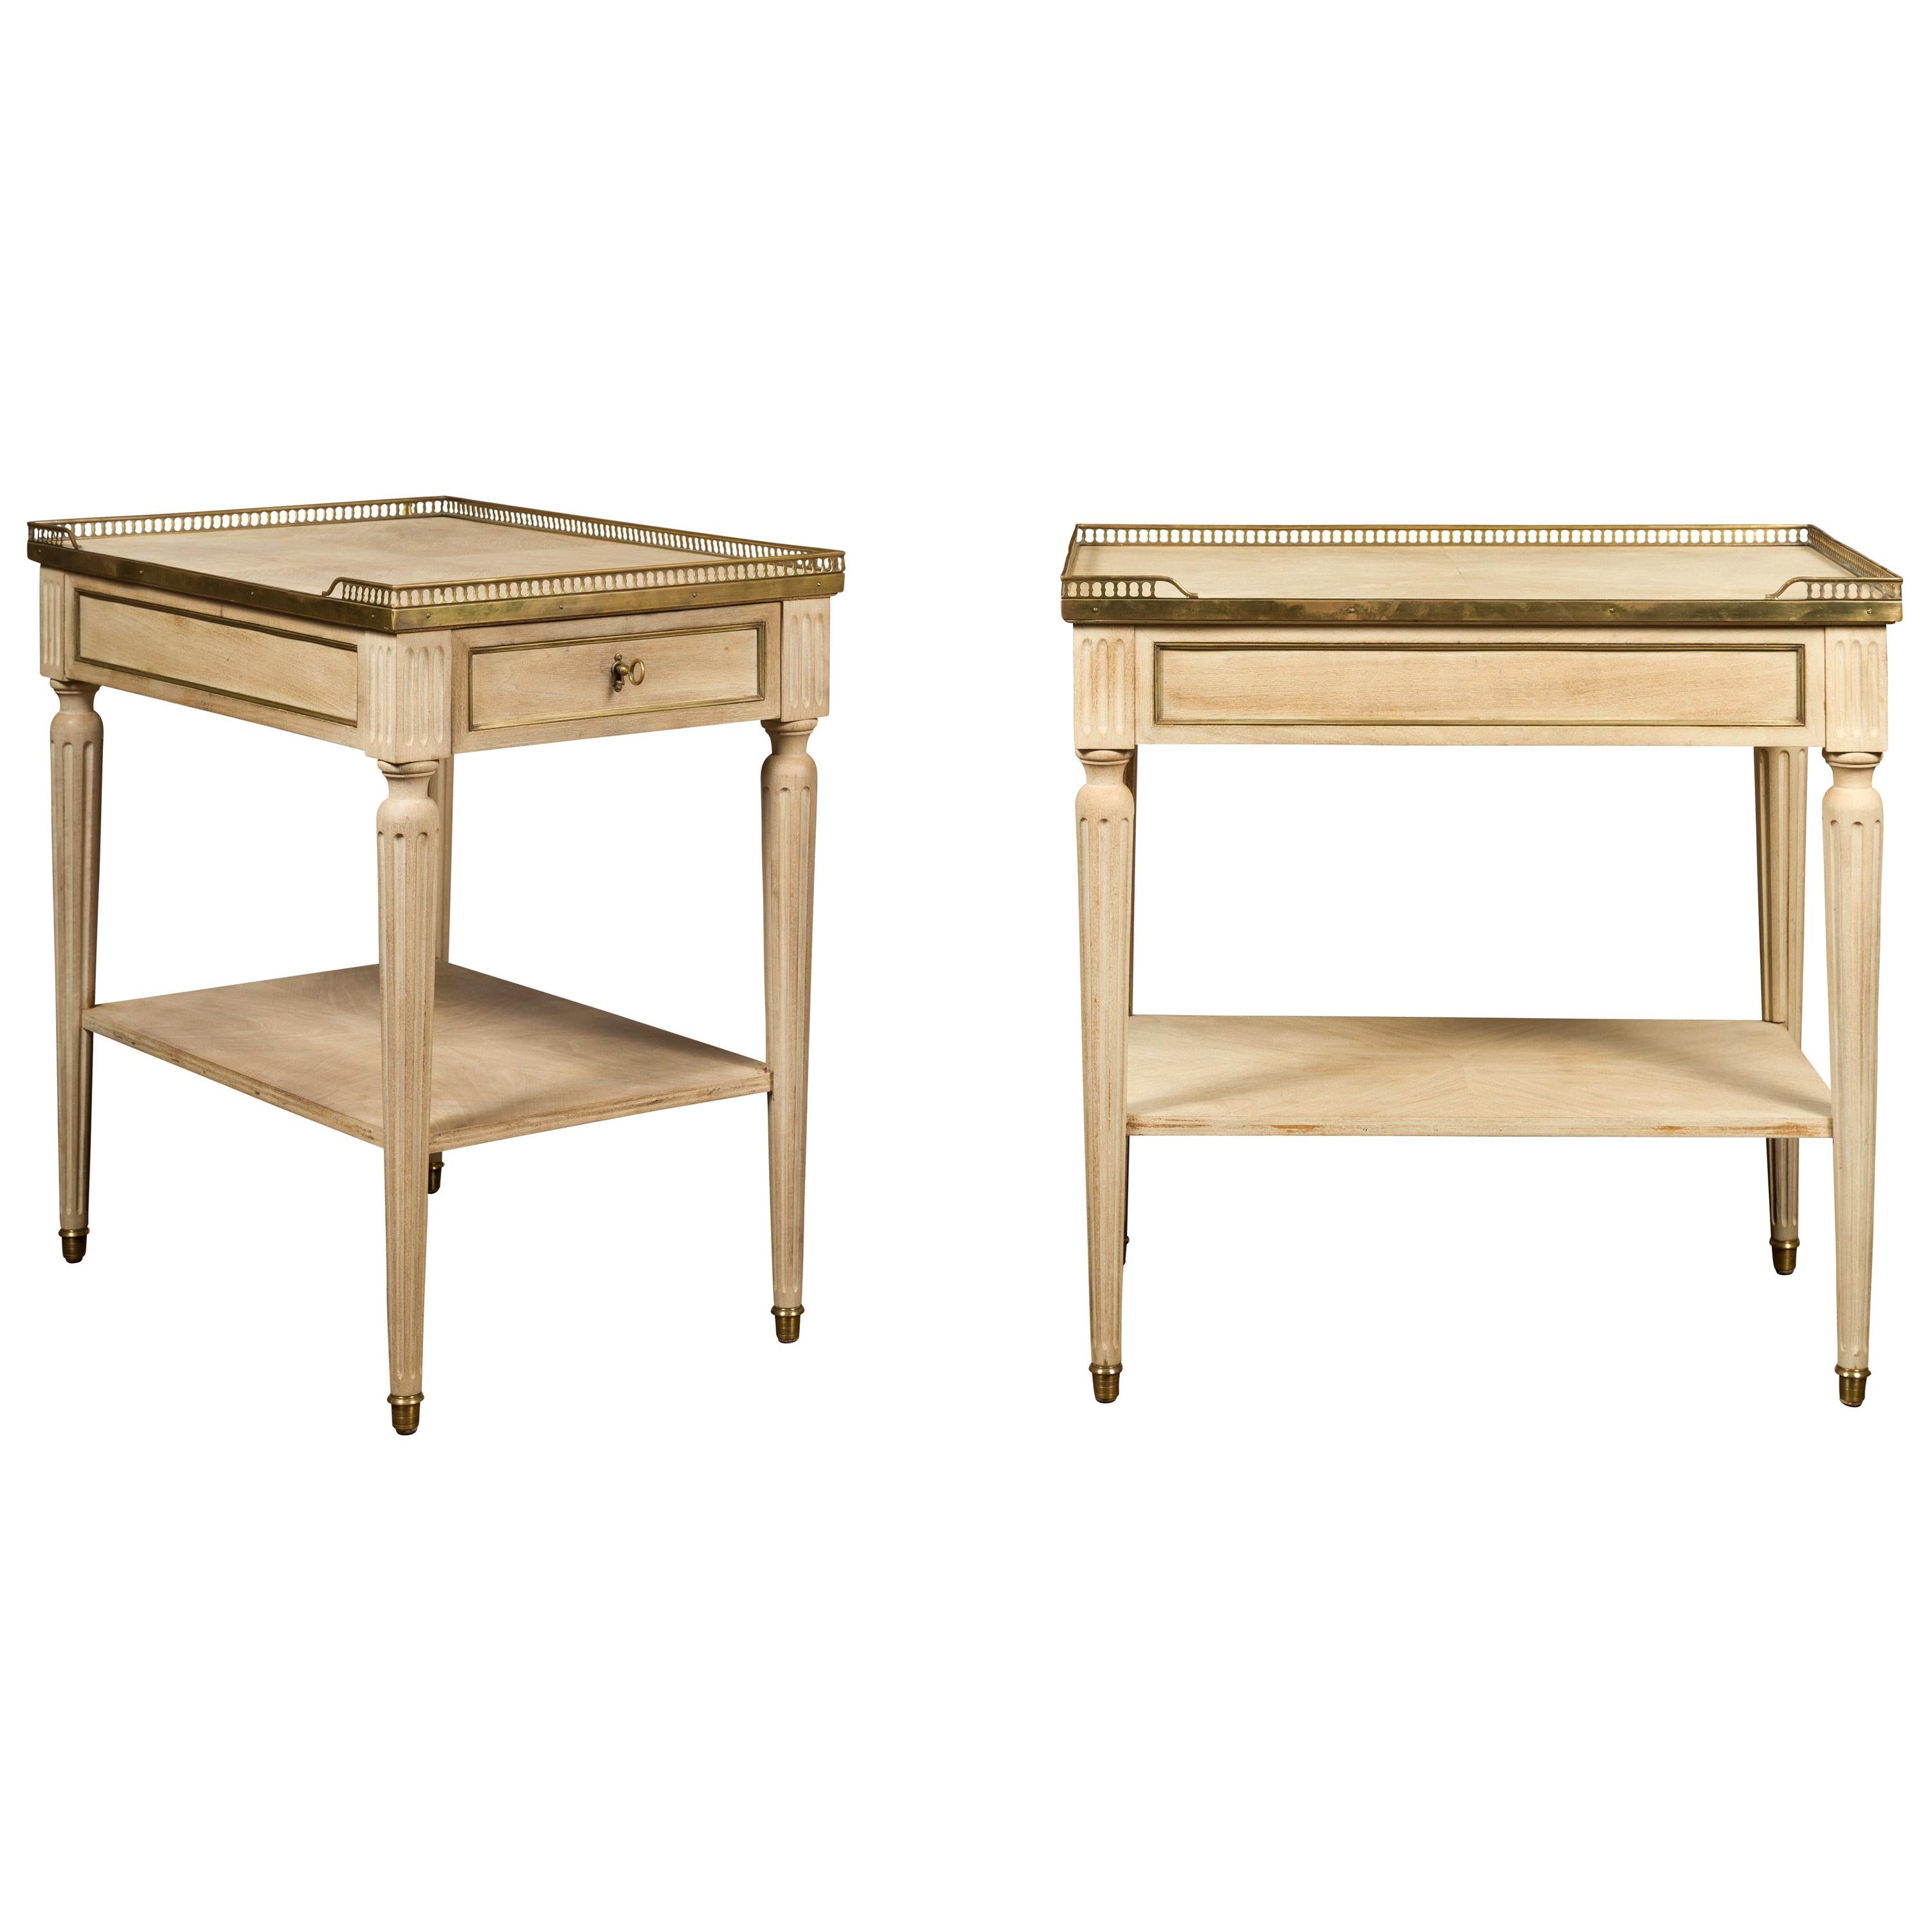 Pair of Midcentury French Bleached Walnut End Tables with Drawers and Gallery